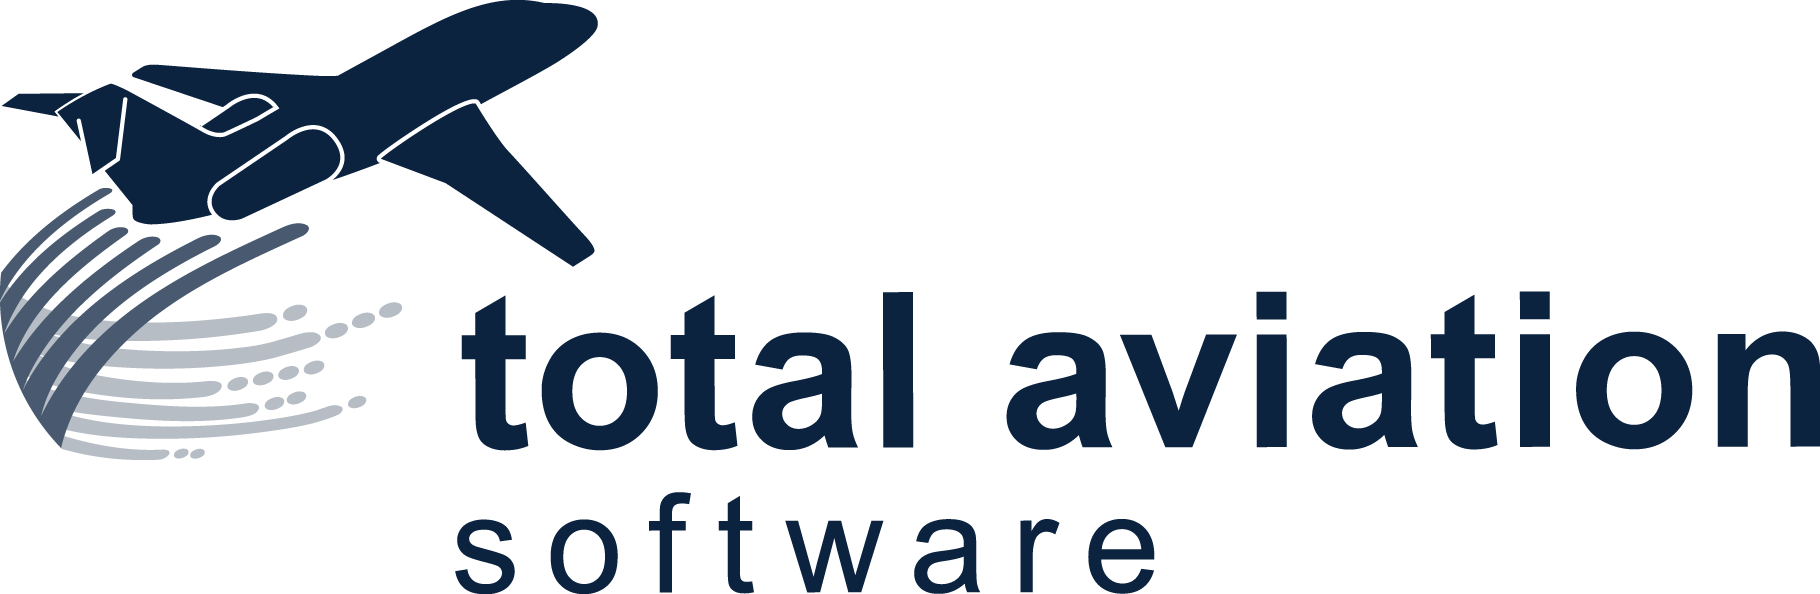 General Aviation Logo - Total Aviation Software Released by Multi Service Technology ...